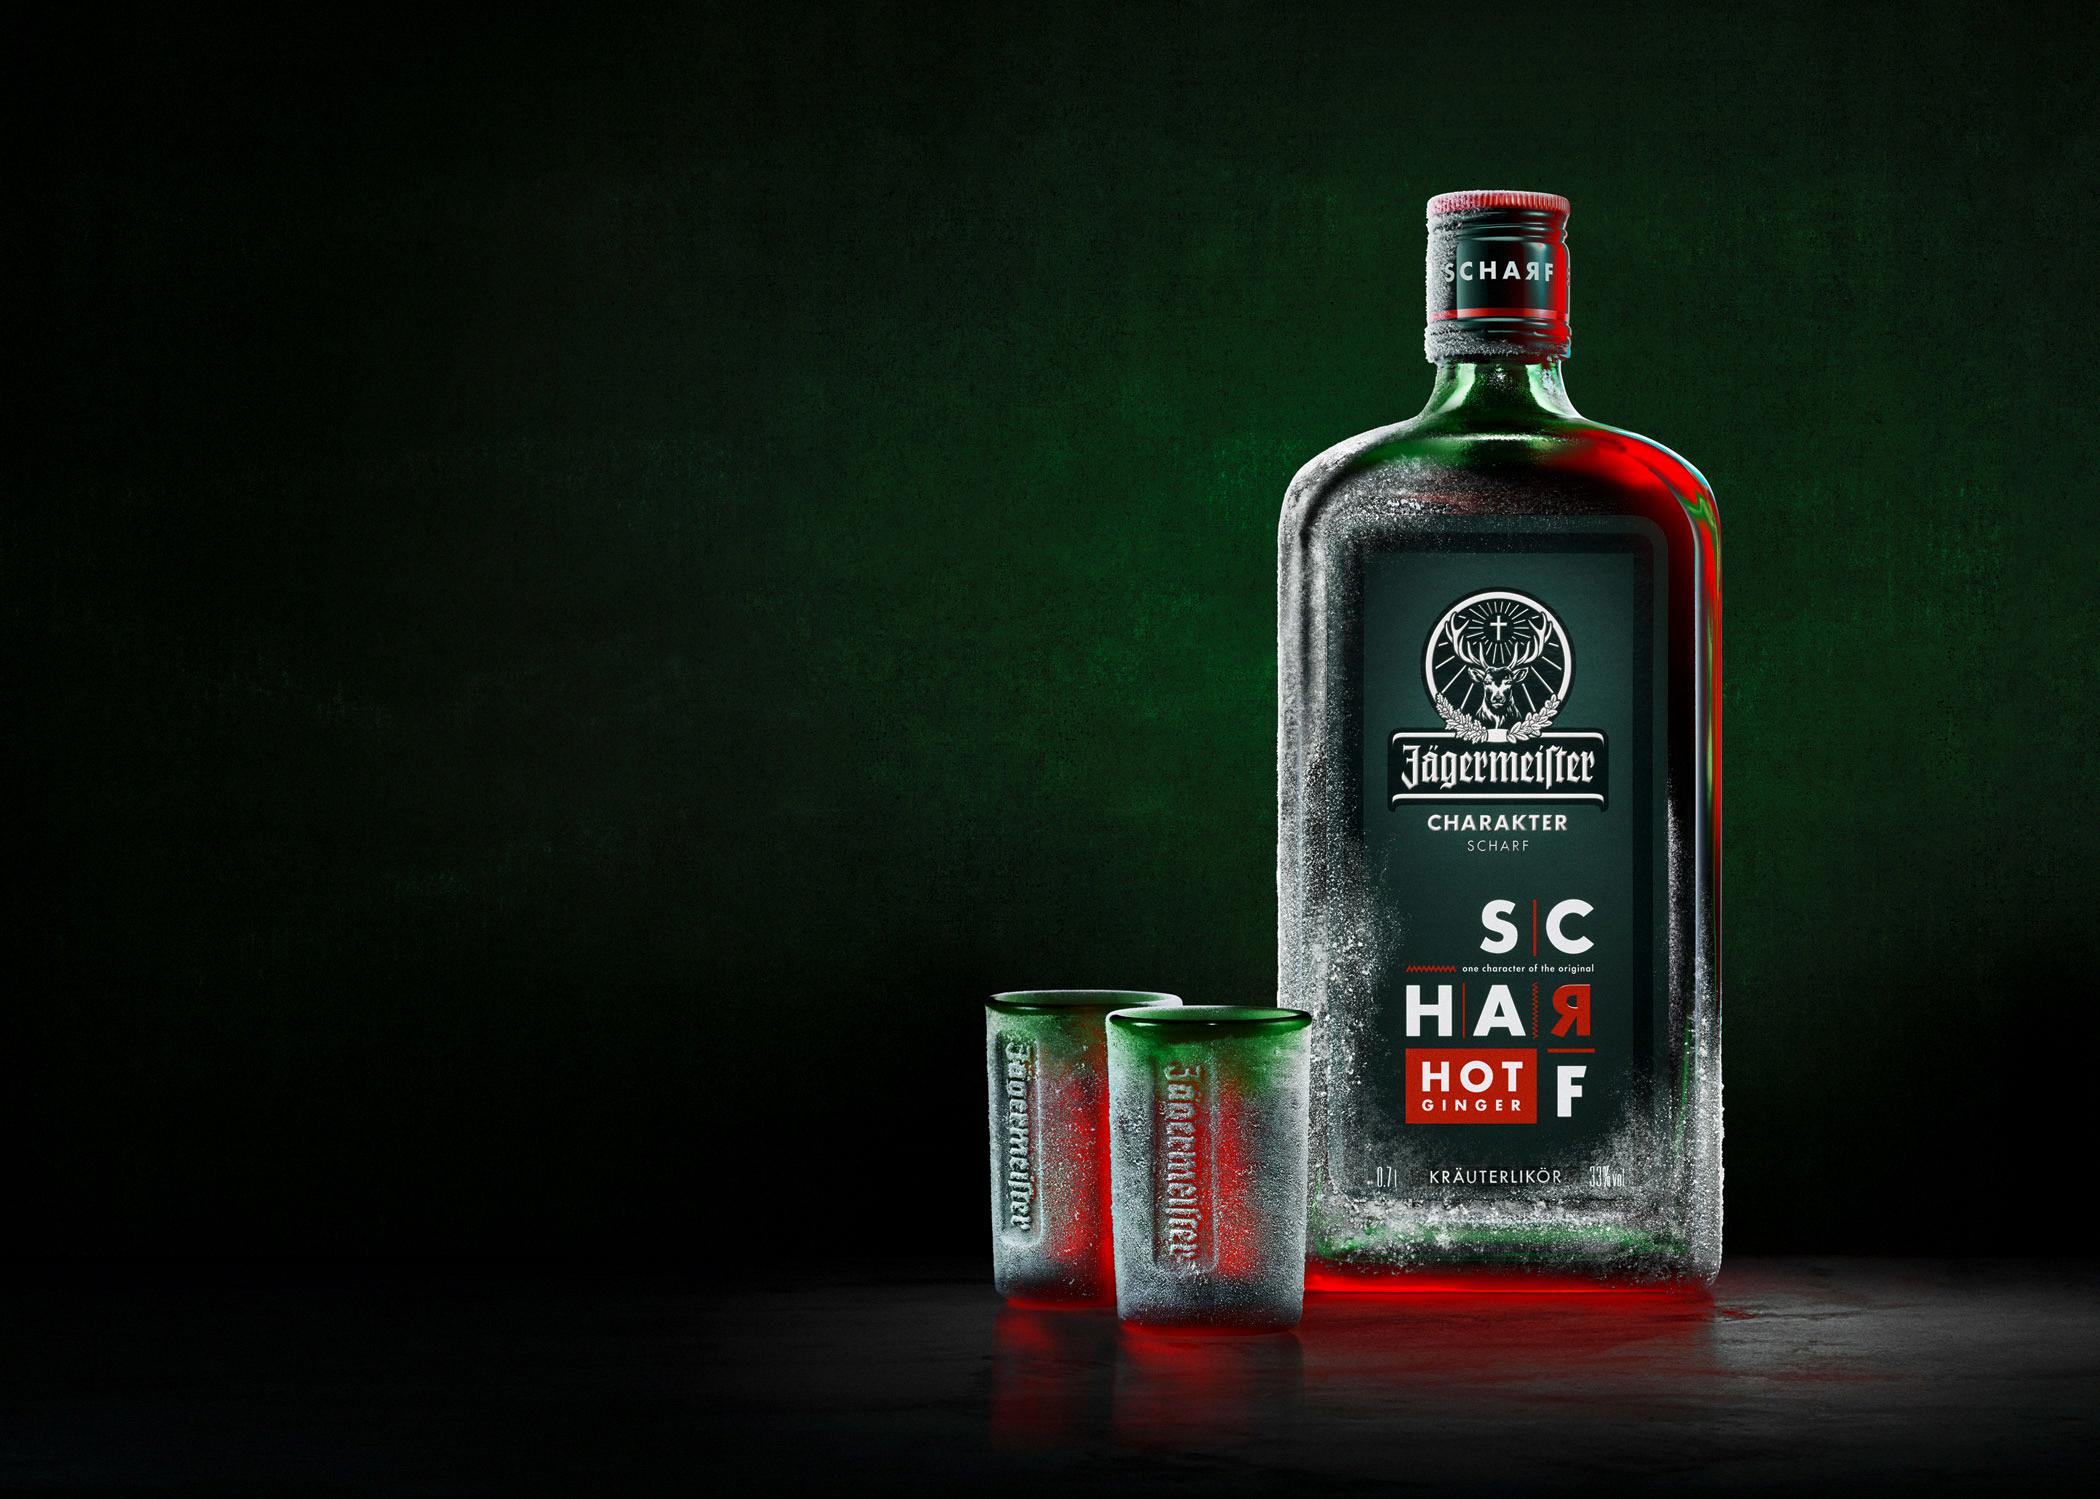 jager 1l